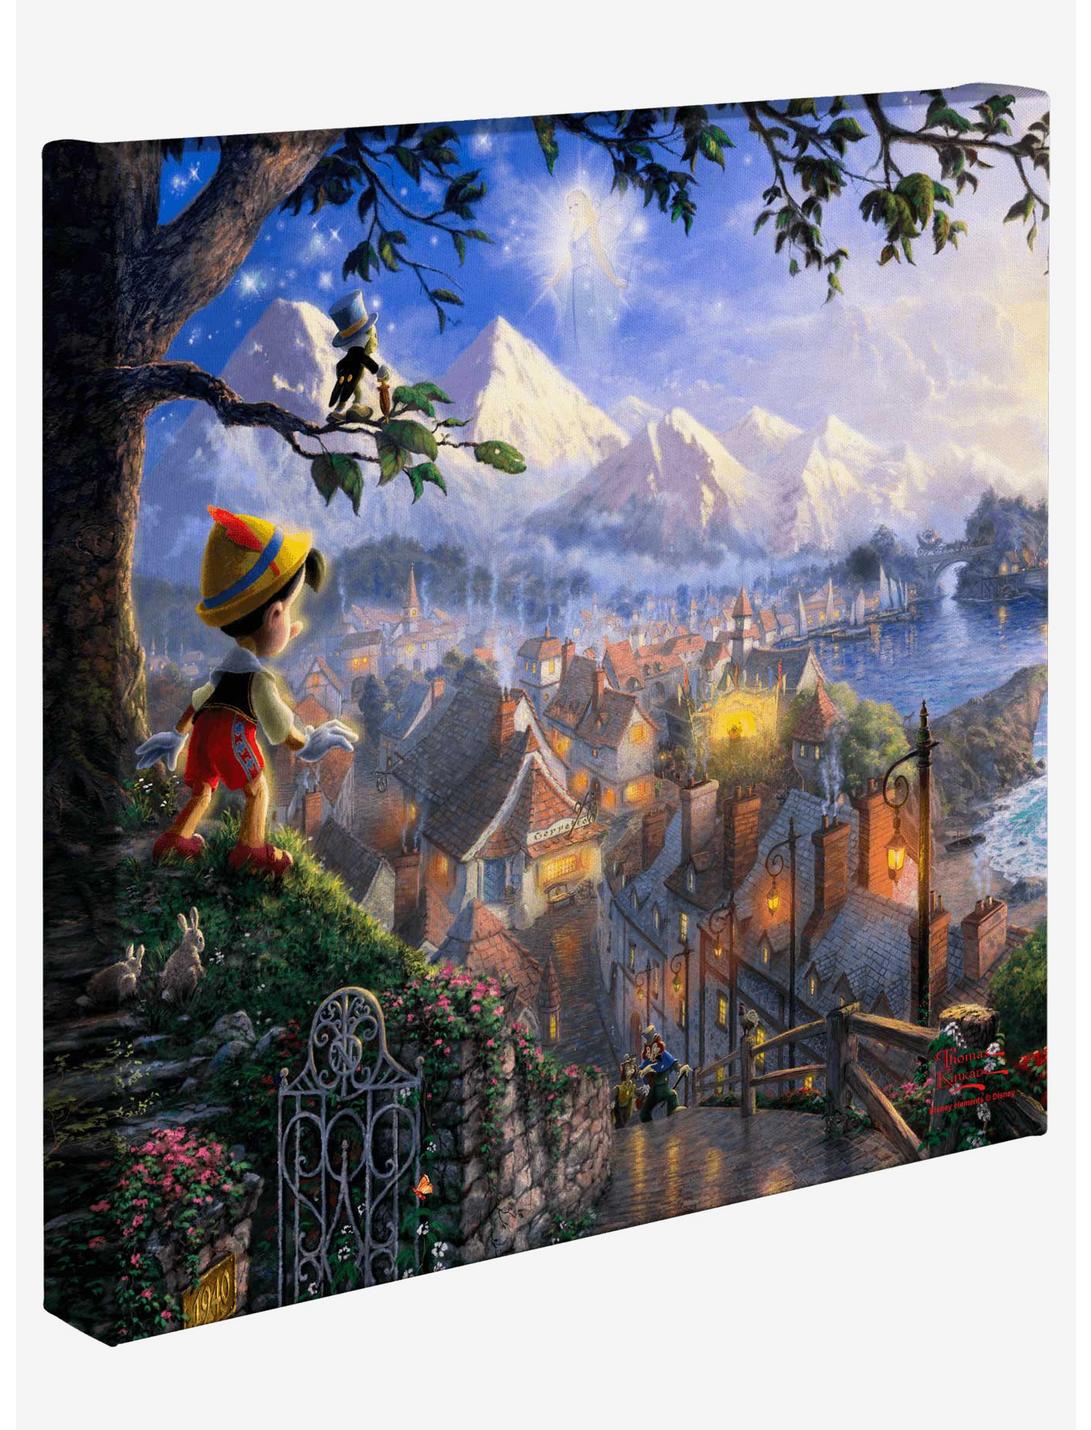 Disney Pinocchio Wishes Upon A Star 14" x 14" Gallery Wrapped Canvas, , hi-res